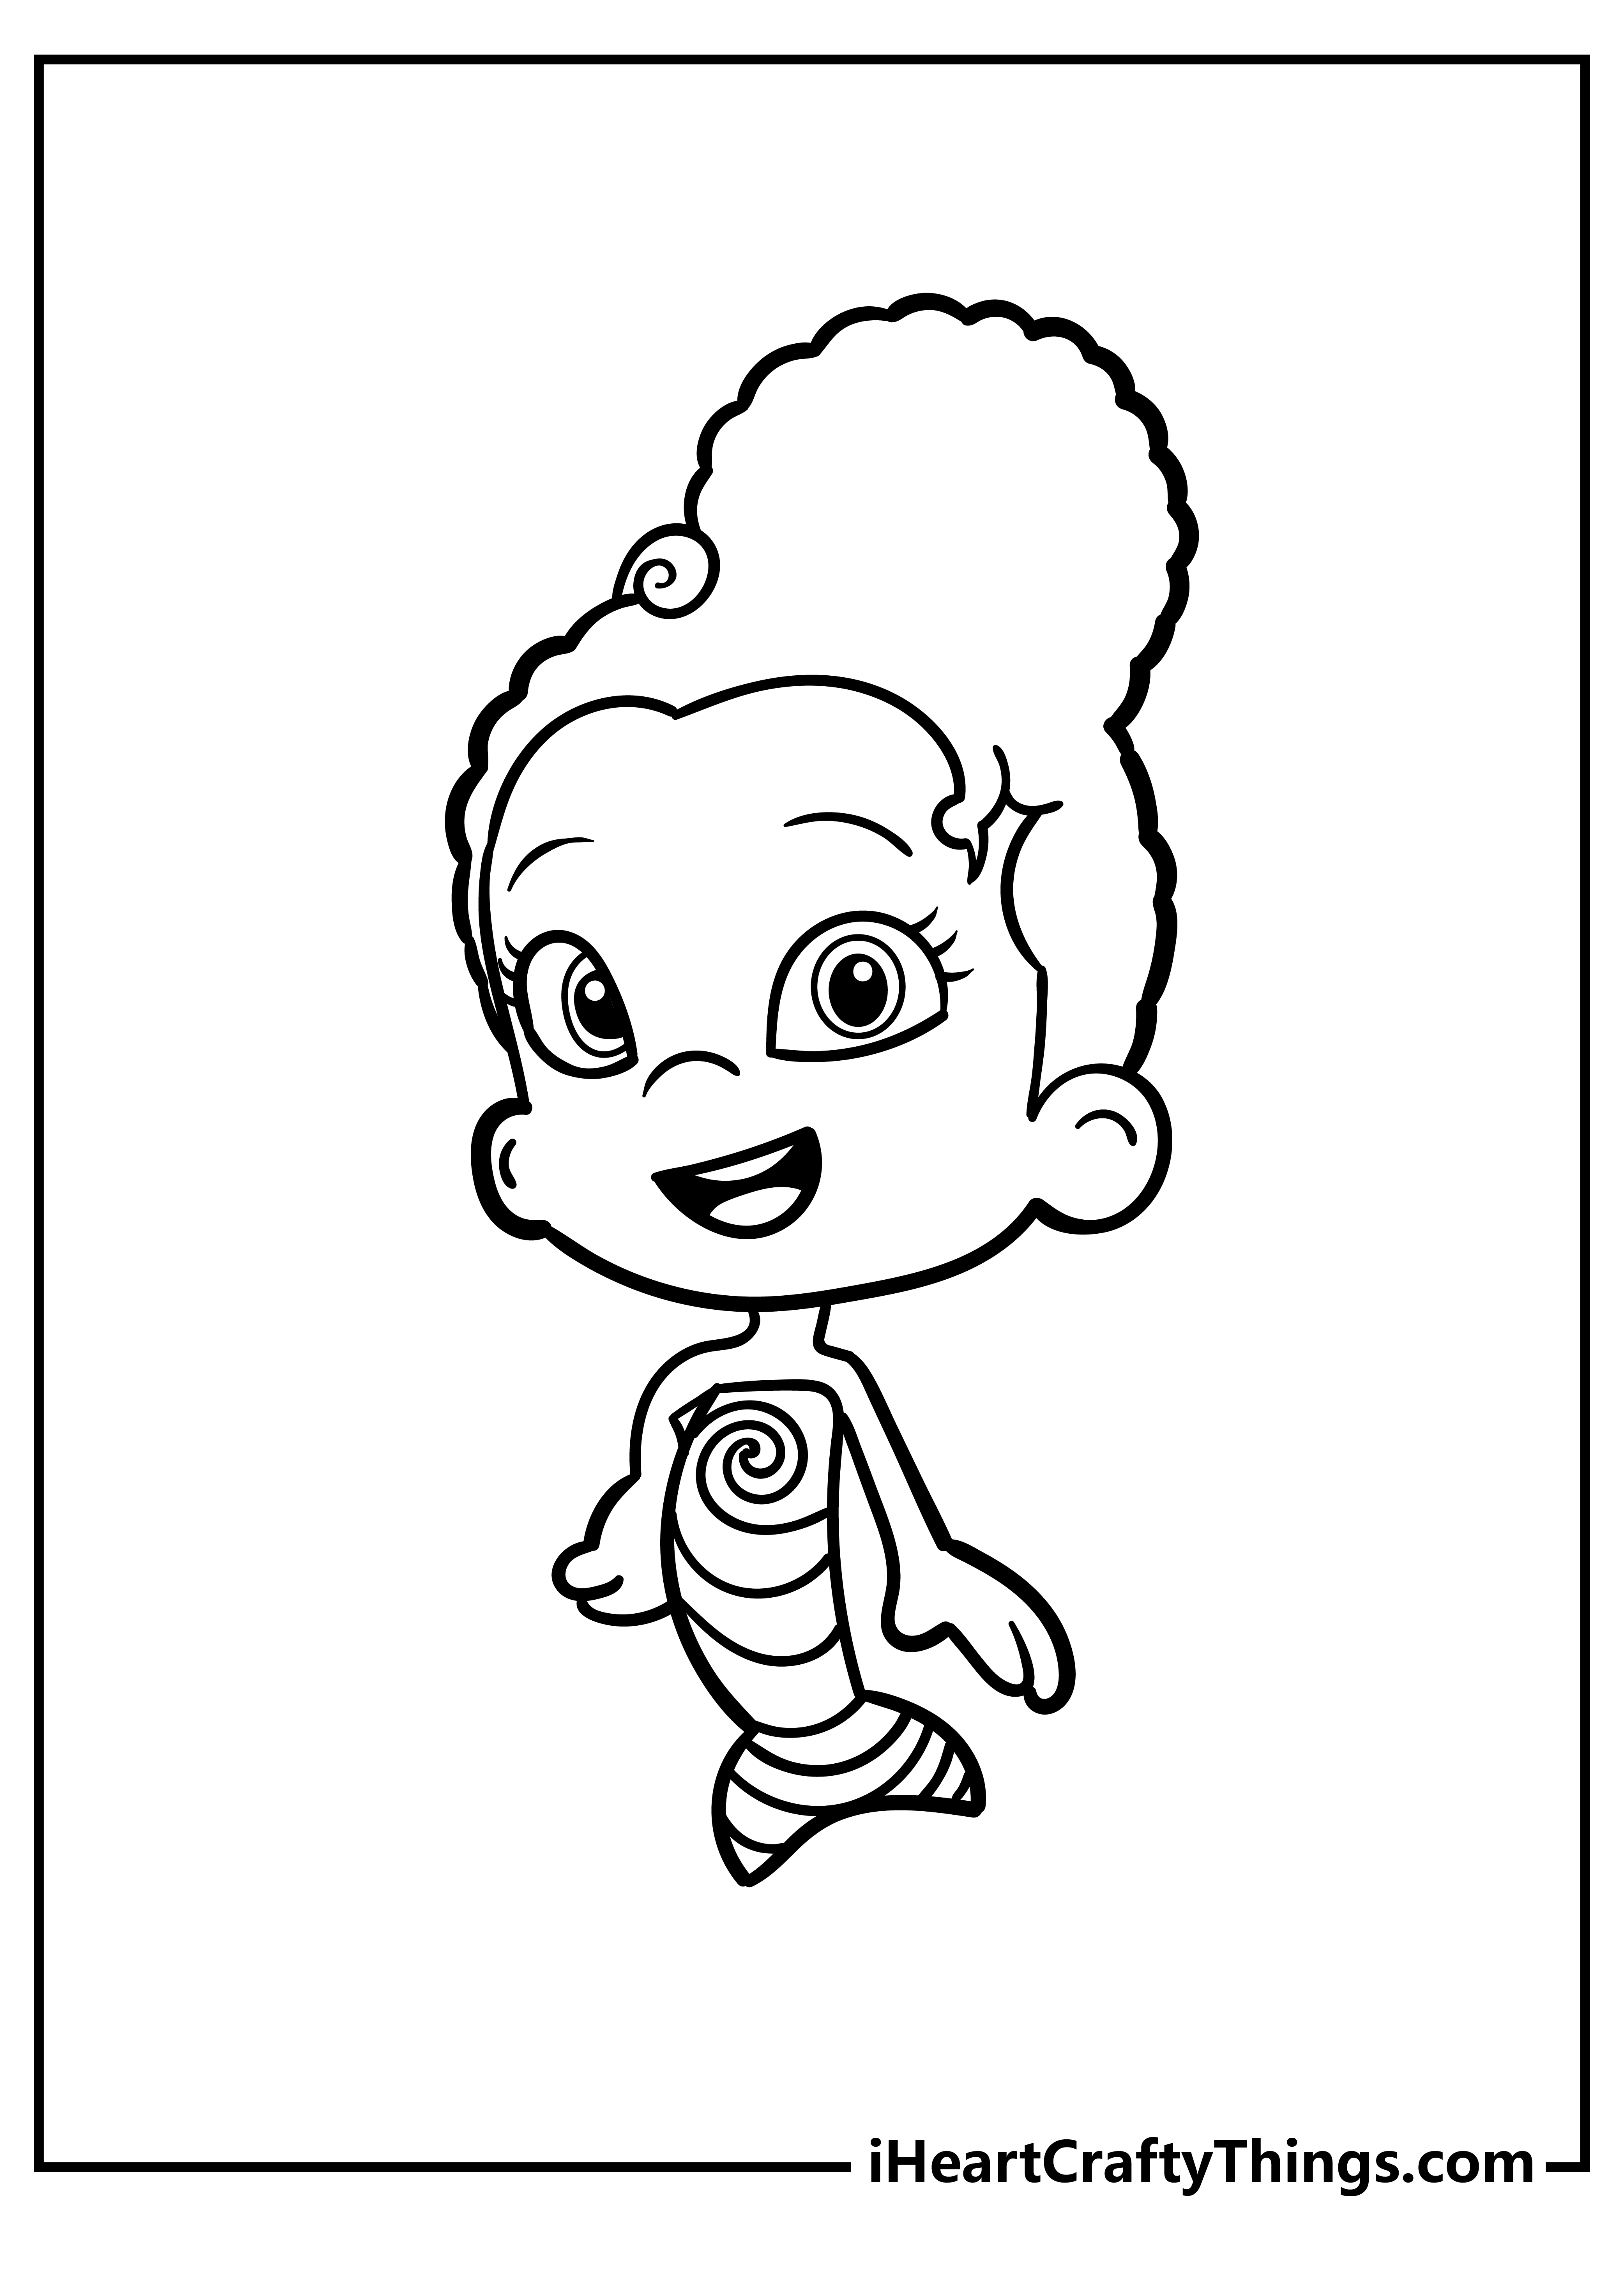 Bubble Guppies Coloring Pages for preschoolers free printable